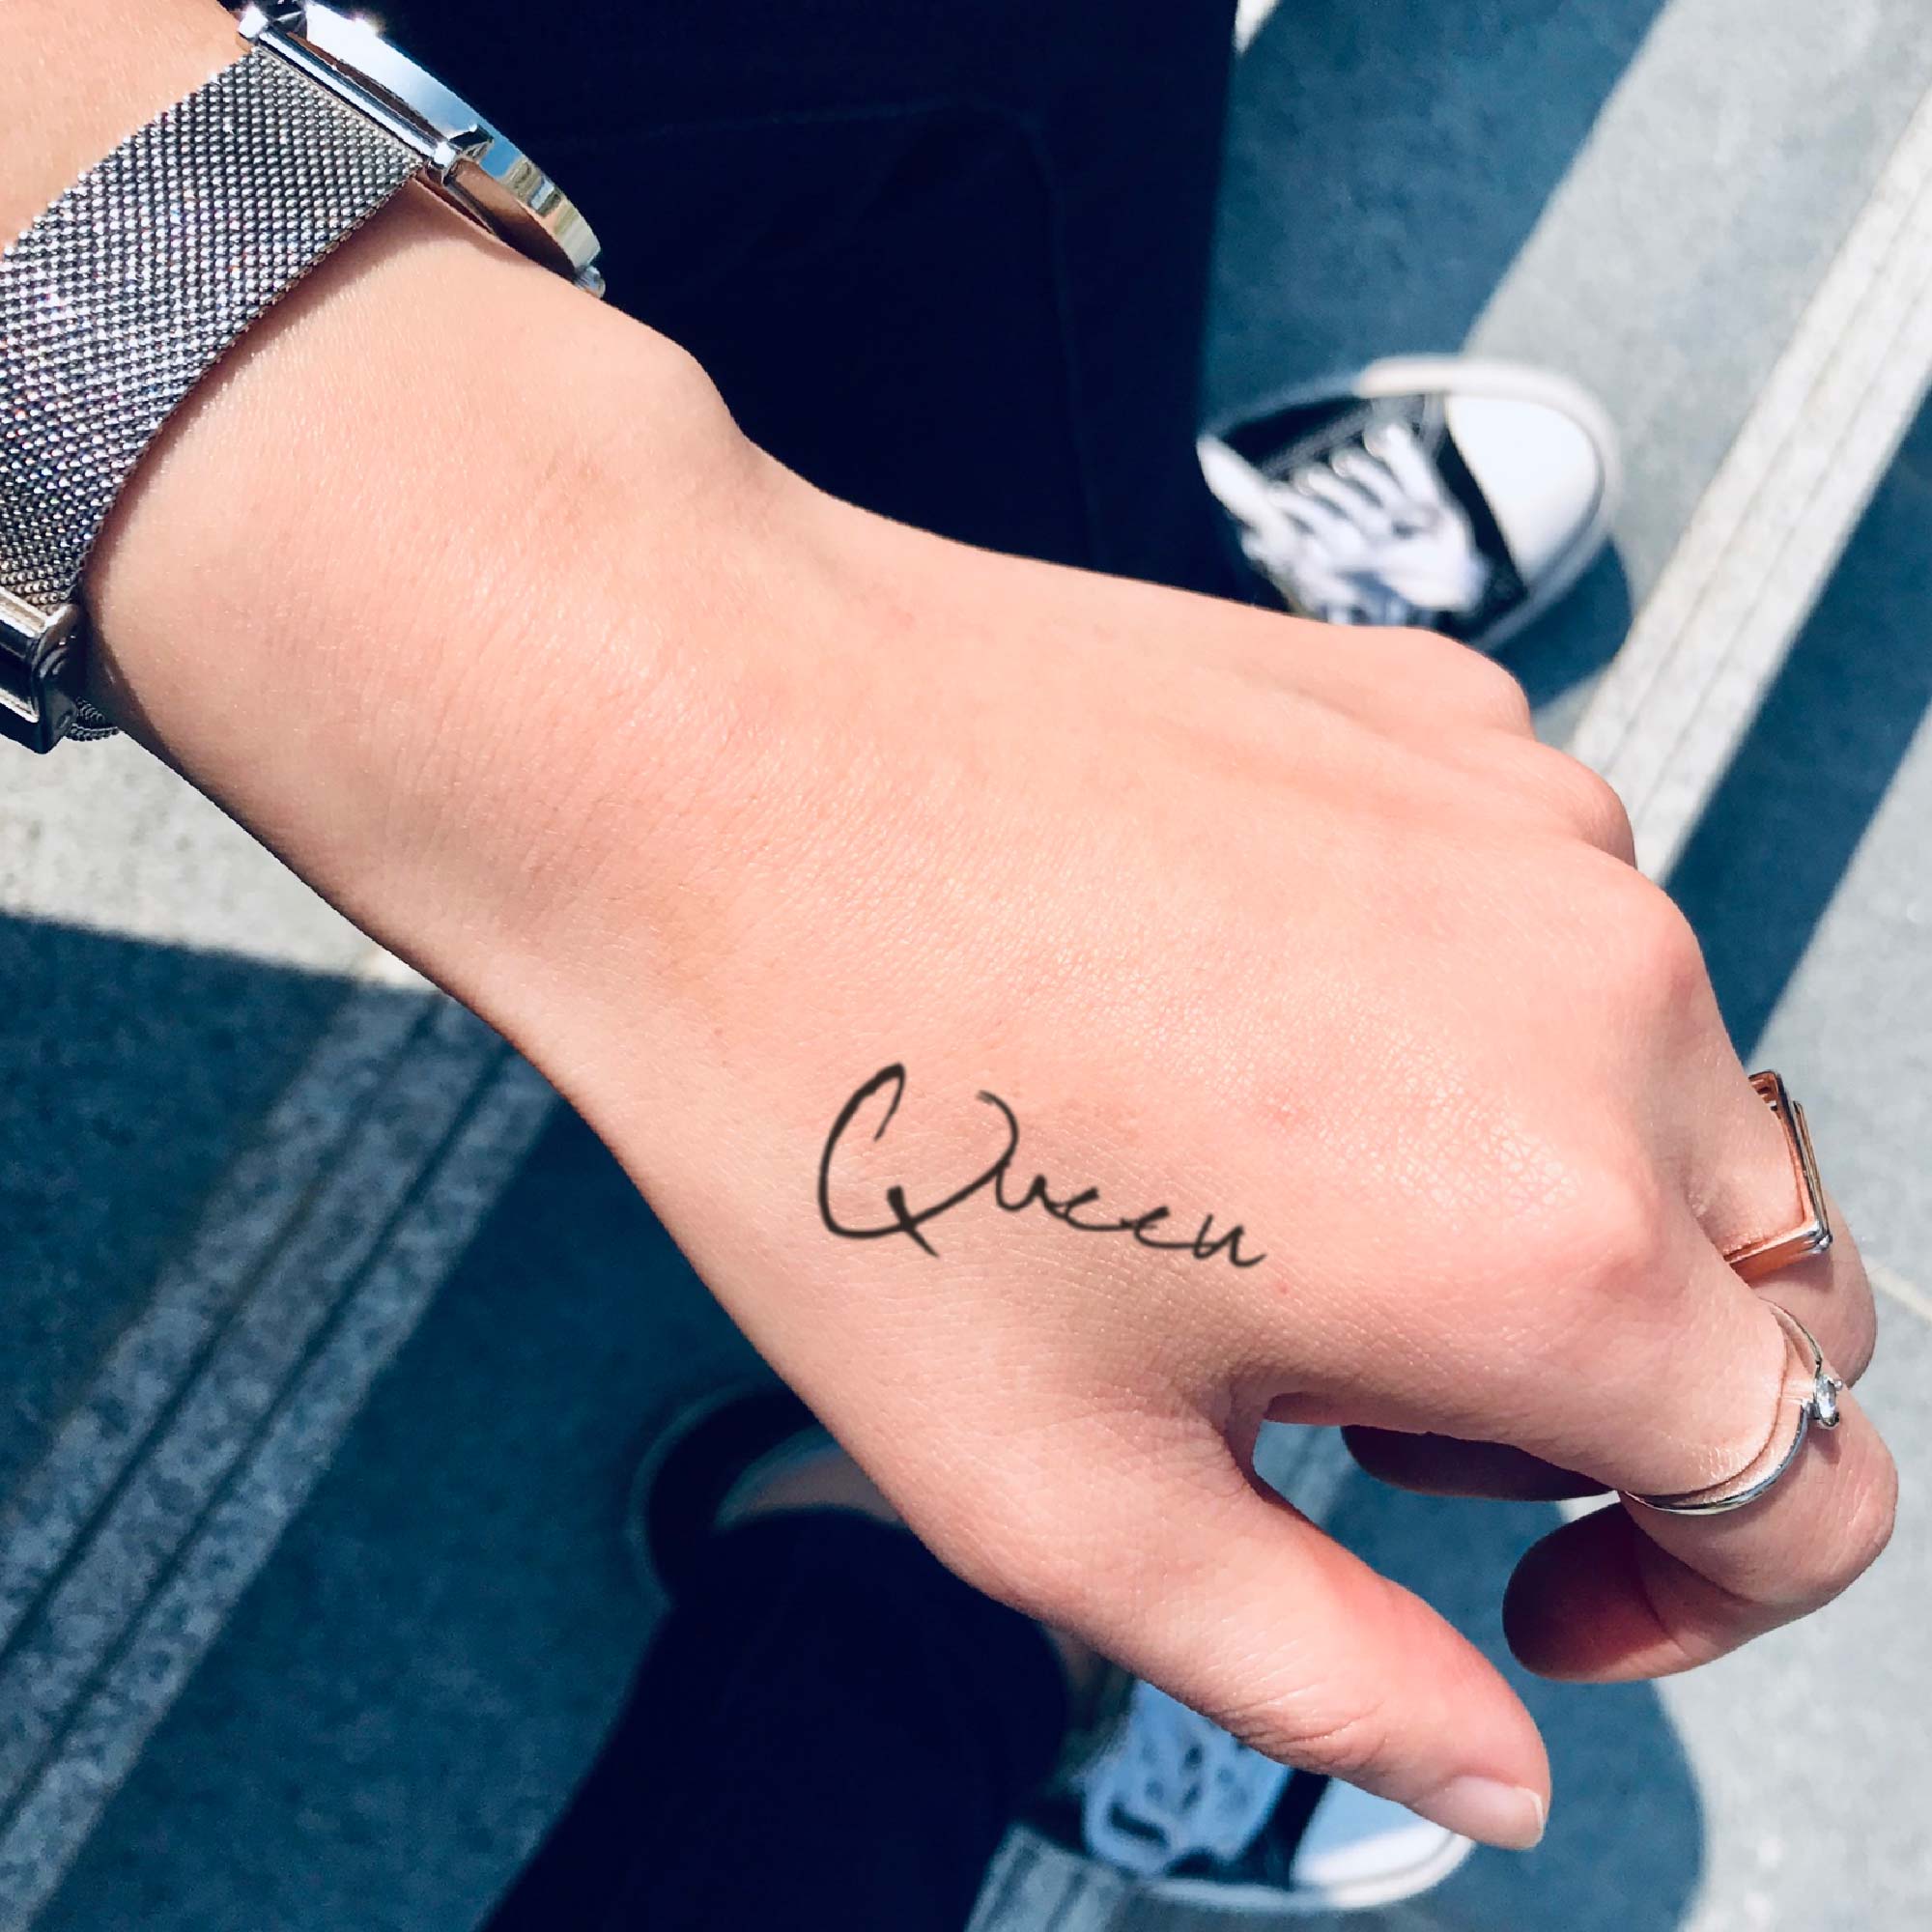 85 MindBlowing King  Queen Tattoos And Their Meaning  AuthorityTattoo